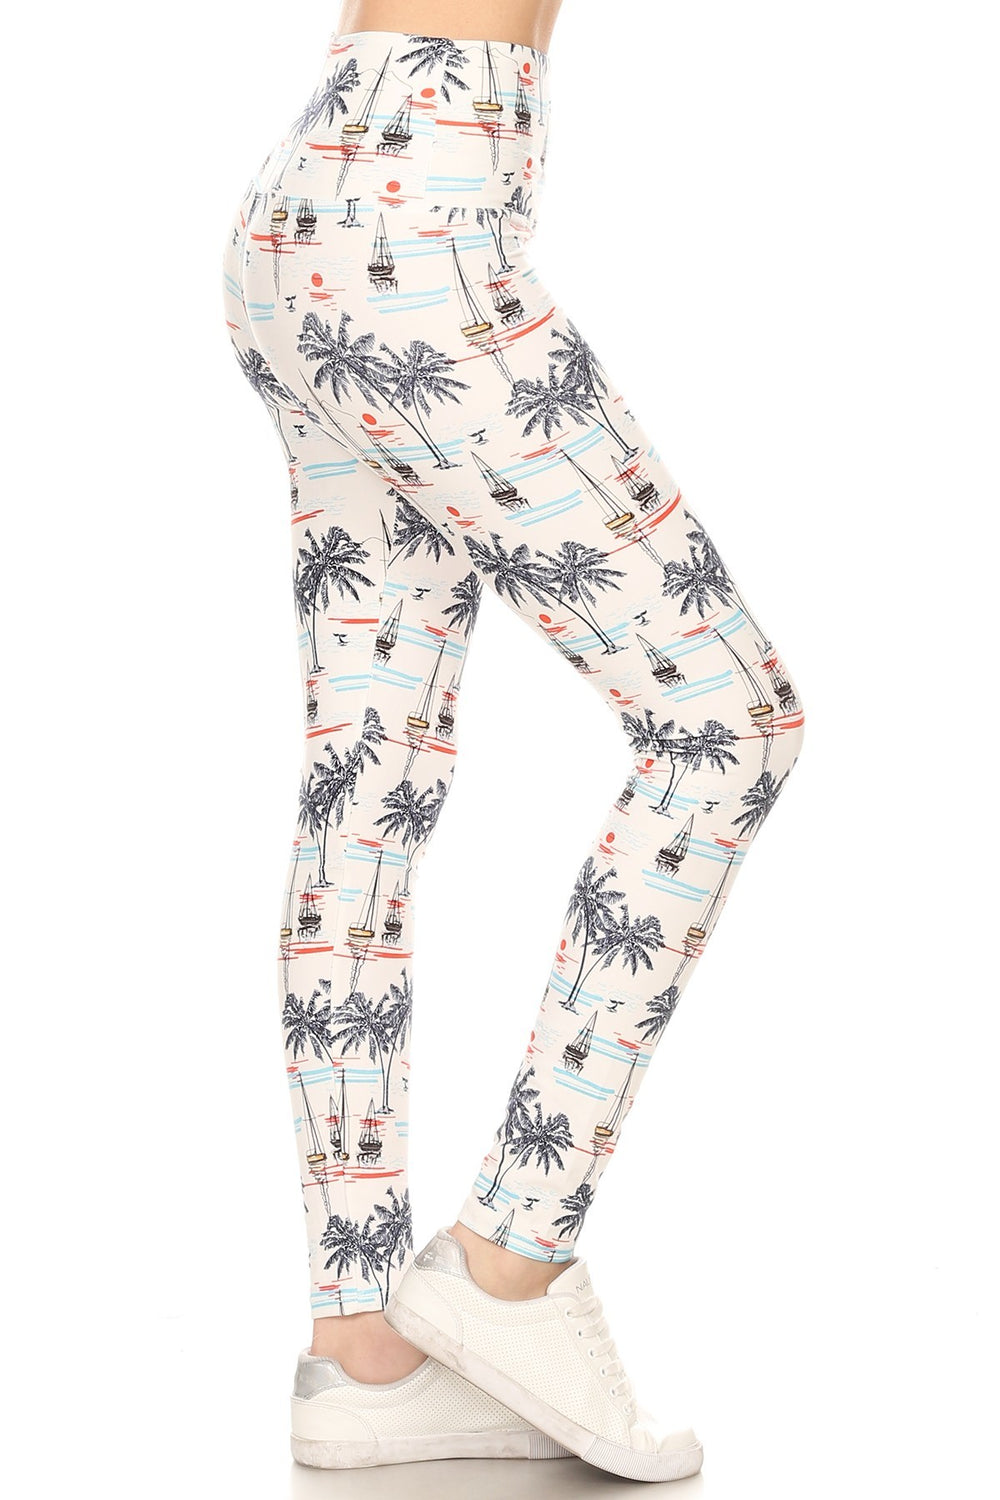 5-inch Long Yoga Style Banded Lined Sailor Printed Knit Legging With High Waist - bertofonsi